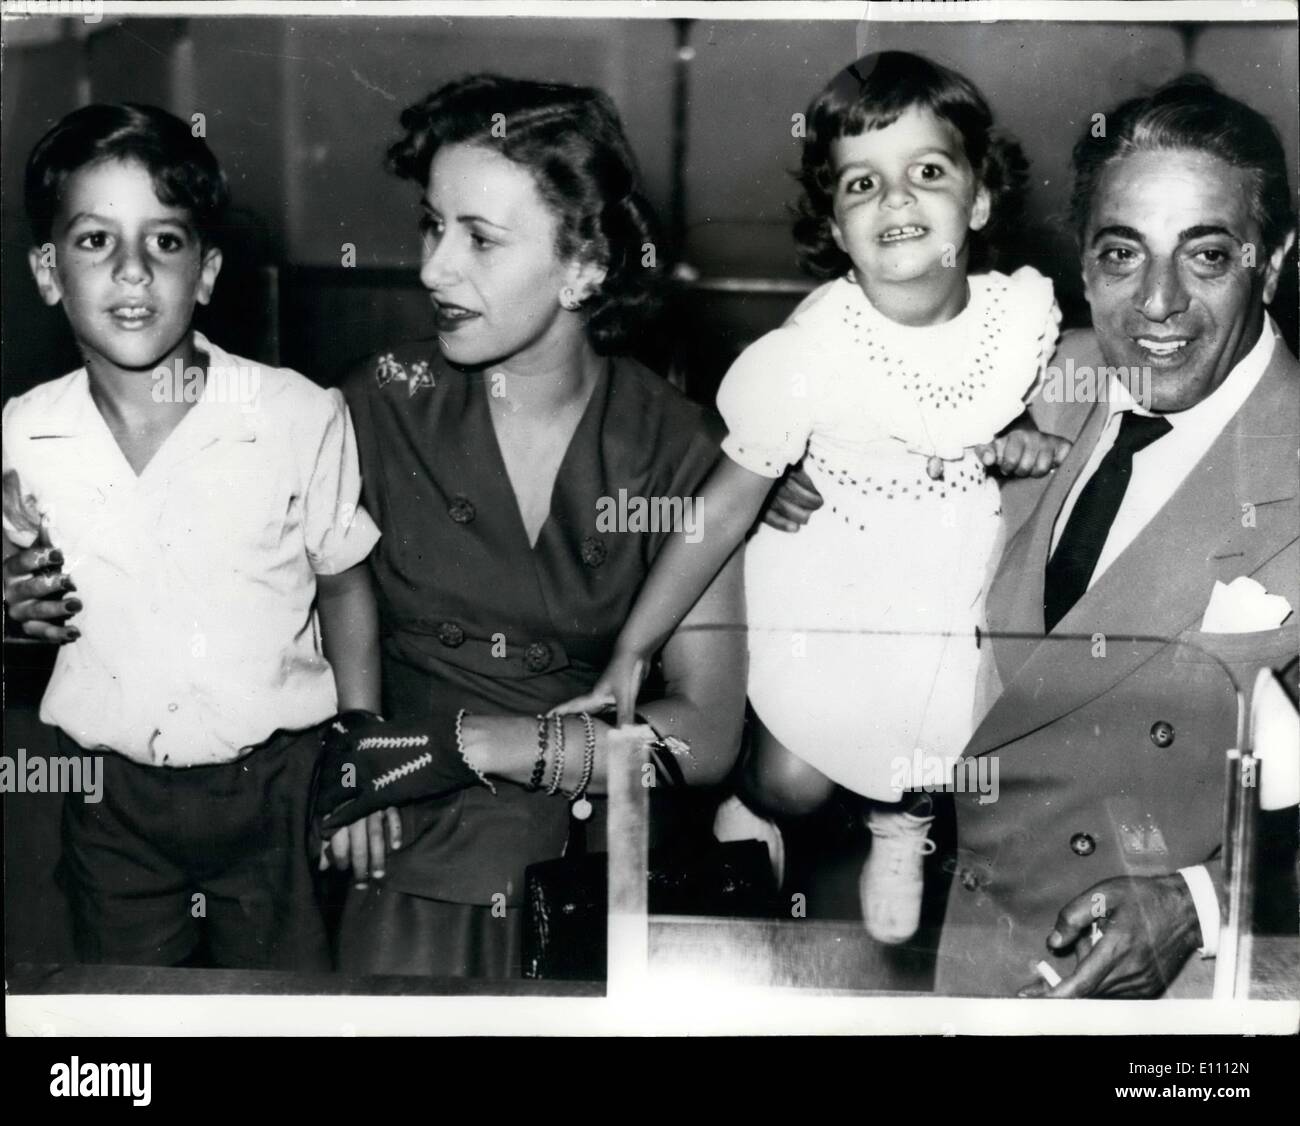 Mar. 03, 1975 - Aristotle Onassis Dies In Paris: Aristotle Onassis The Greek shipping tycoon and husband of Jackie (Kennedy) Onassis, died today in a Paris Hospital at the age of 69. Photo shows Mr. Onassis with his family in 1957, L6R Alexande (killed in plane crash) his wife Athine, (now dead) and daugher Christina. Stock Photo